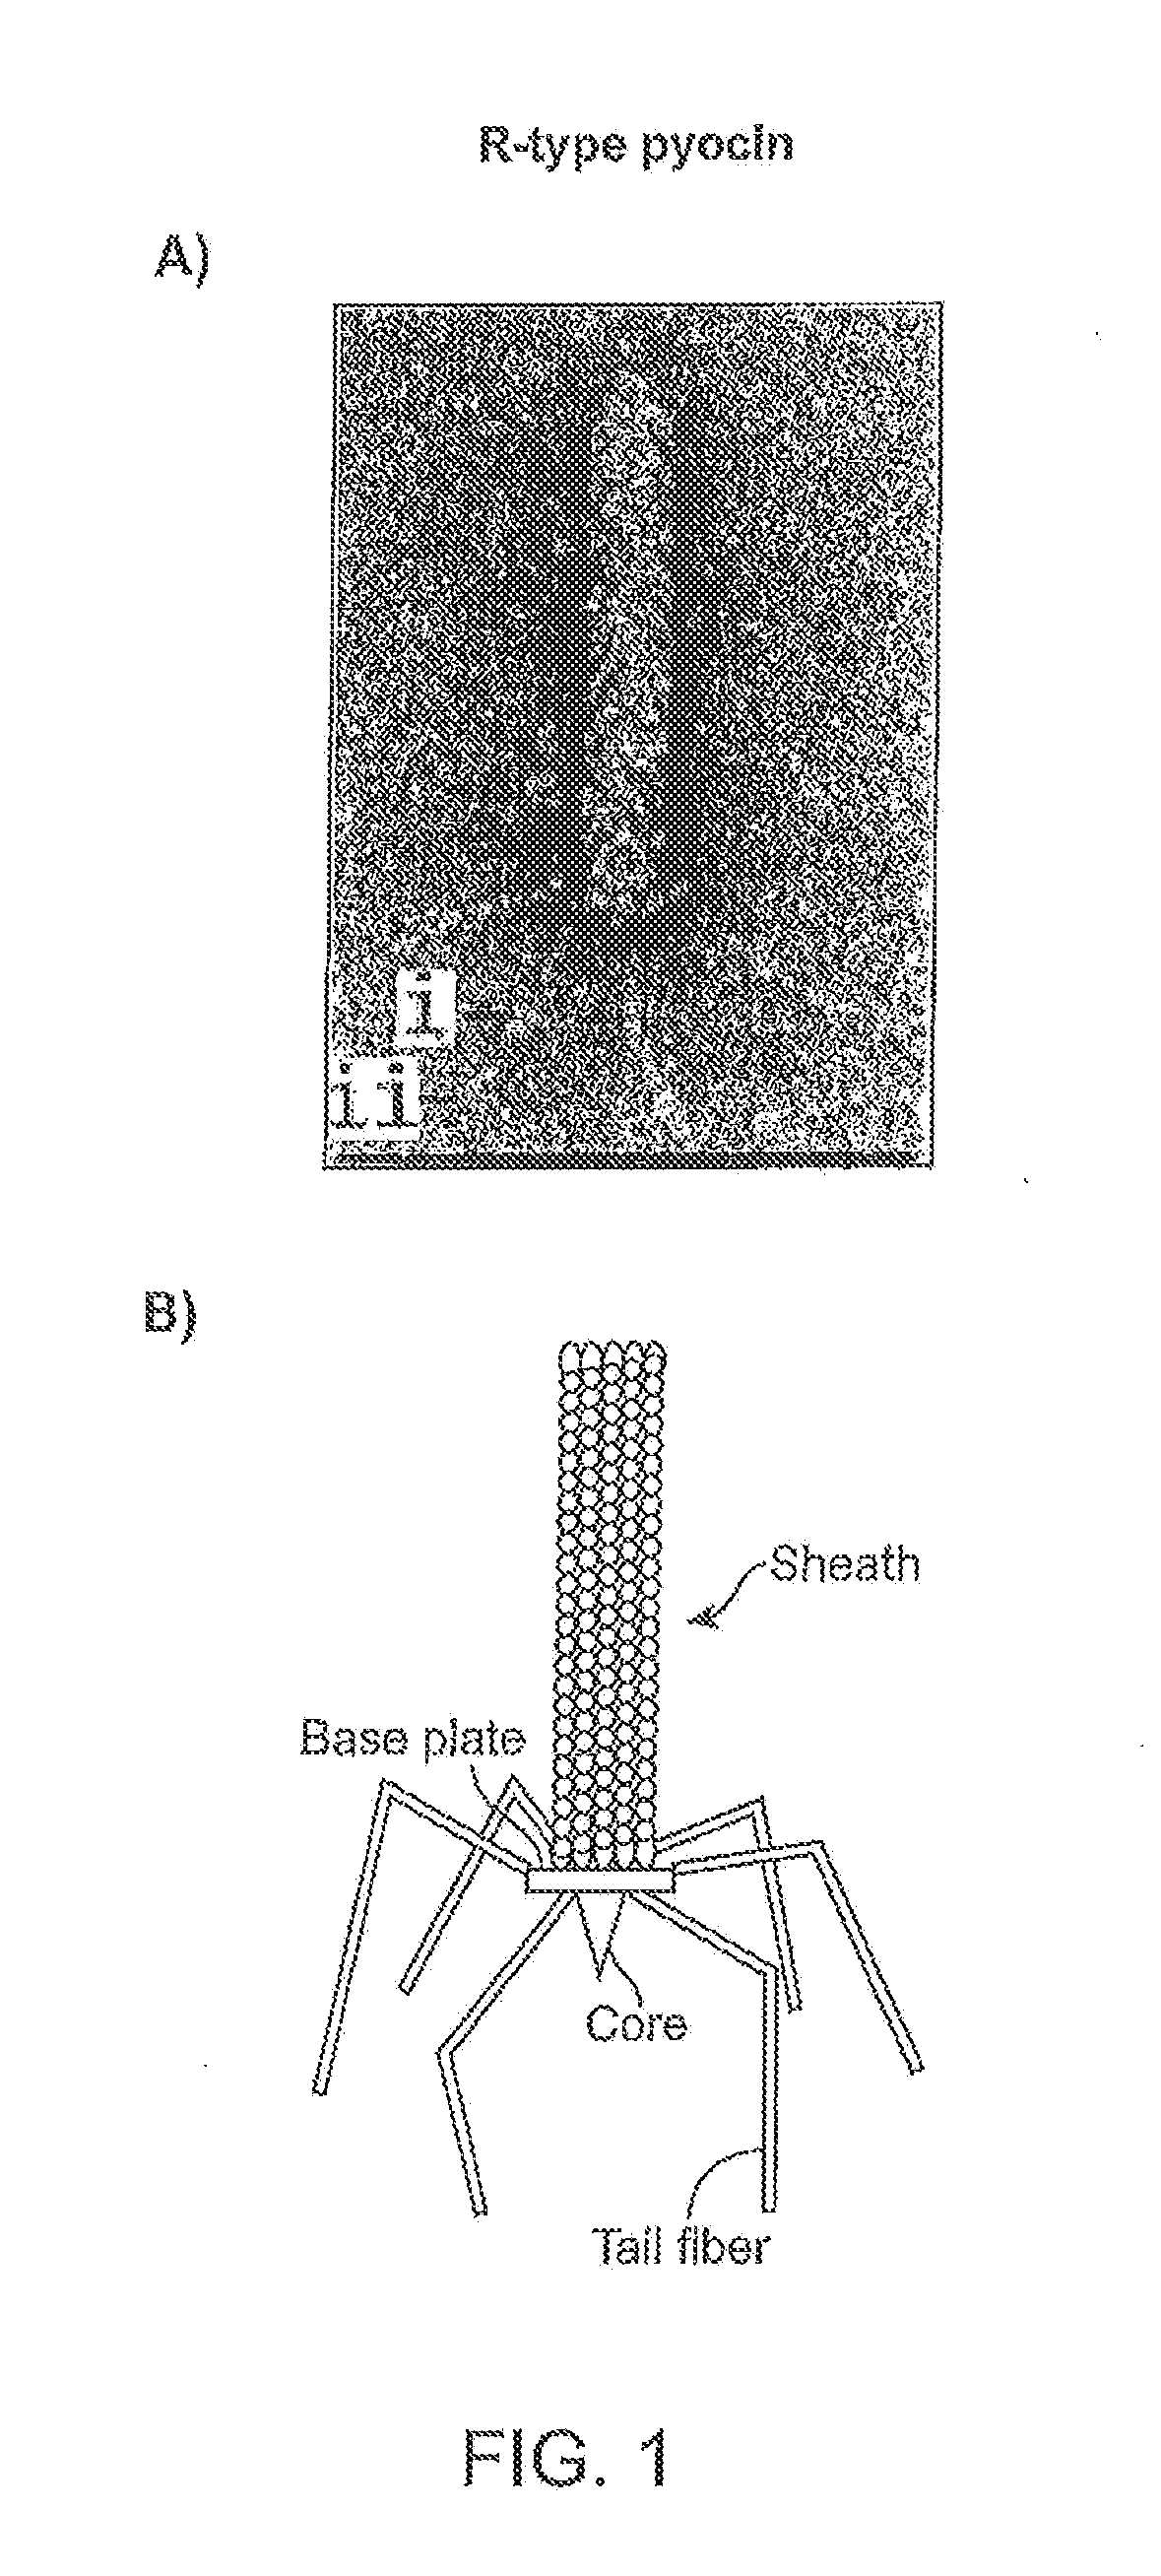 Recombinant bacteriophage and methods for their use